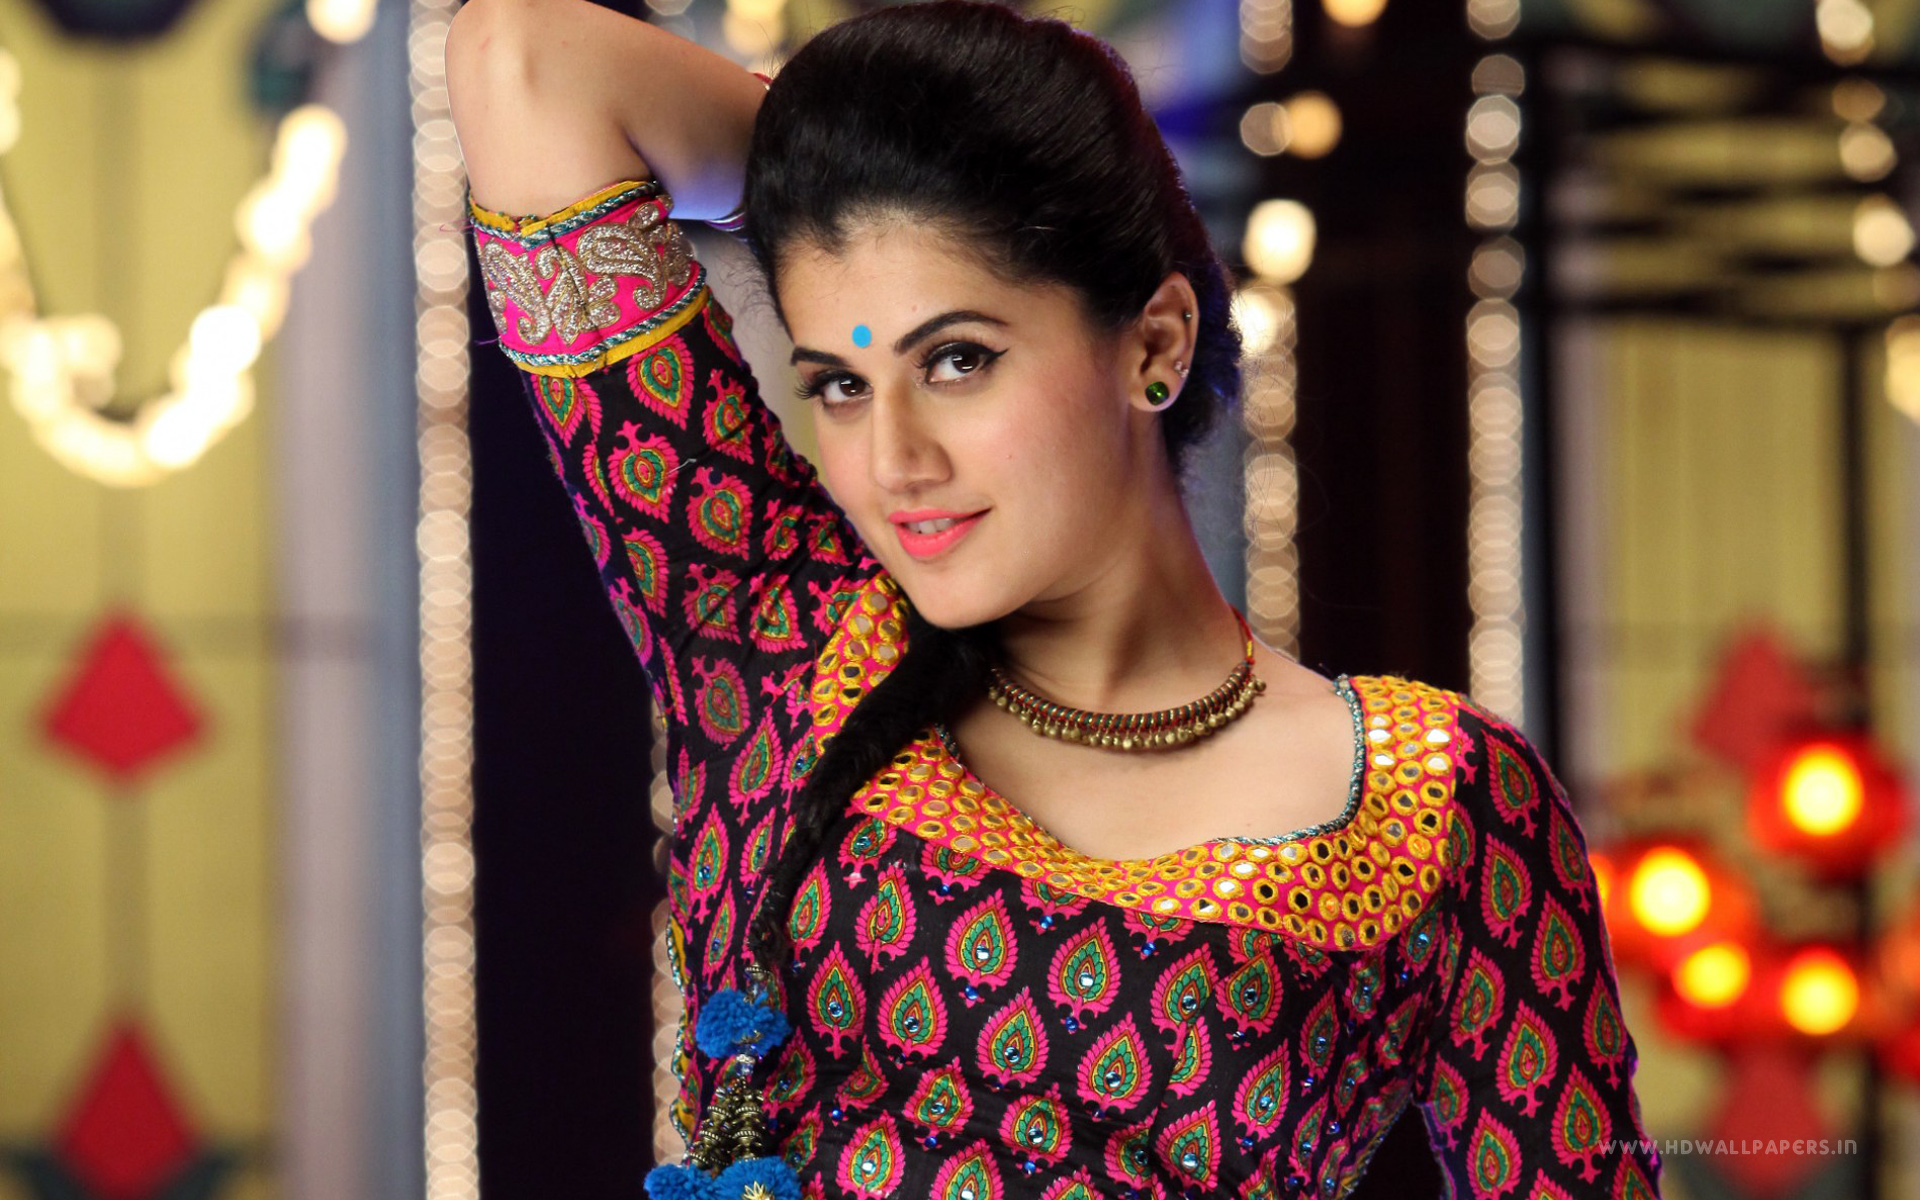 HQ Tapsee Pannu Wallpapers | File 883.61Kb